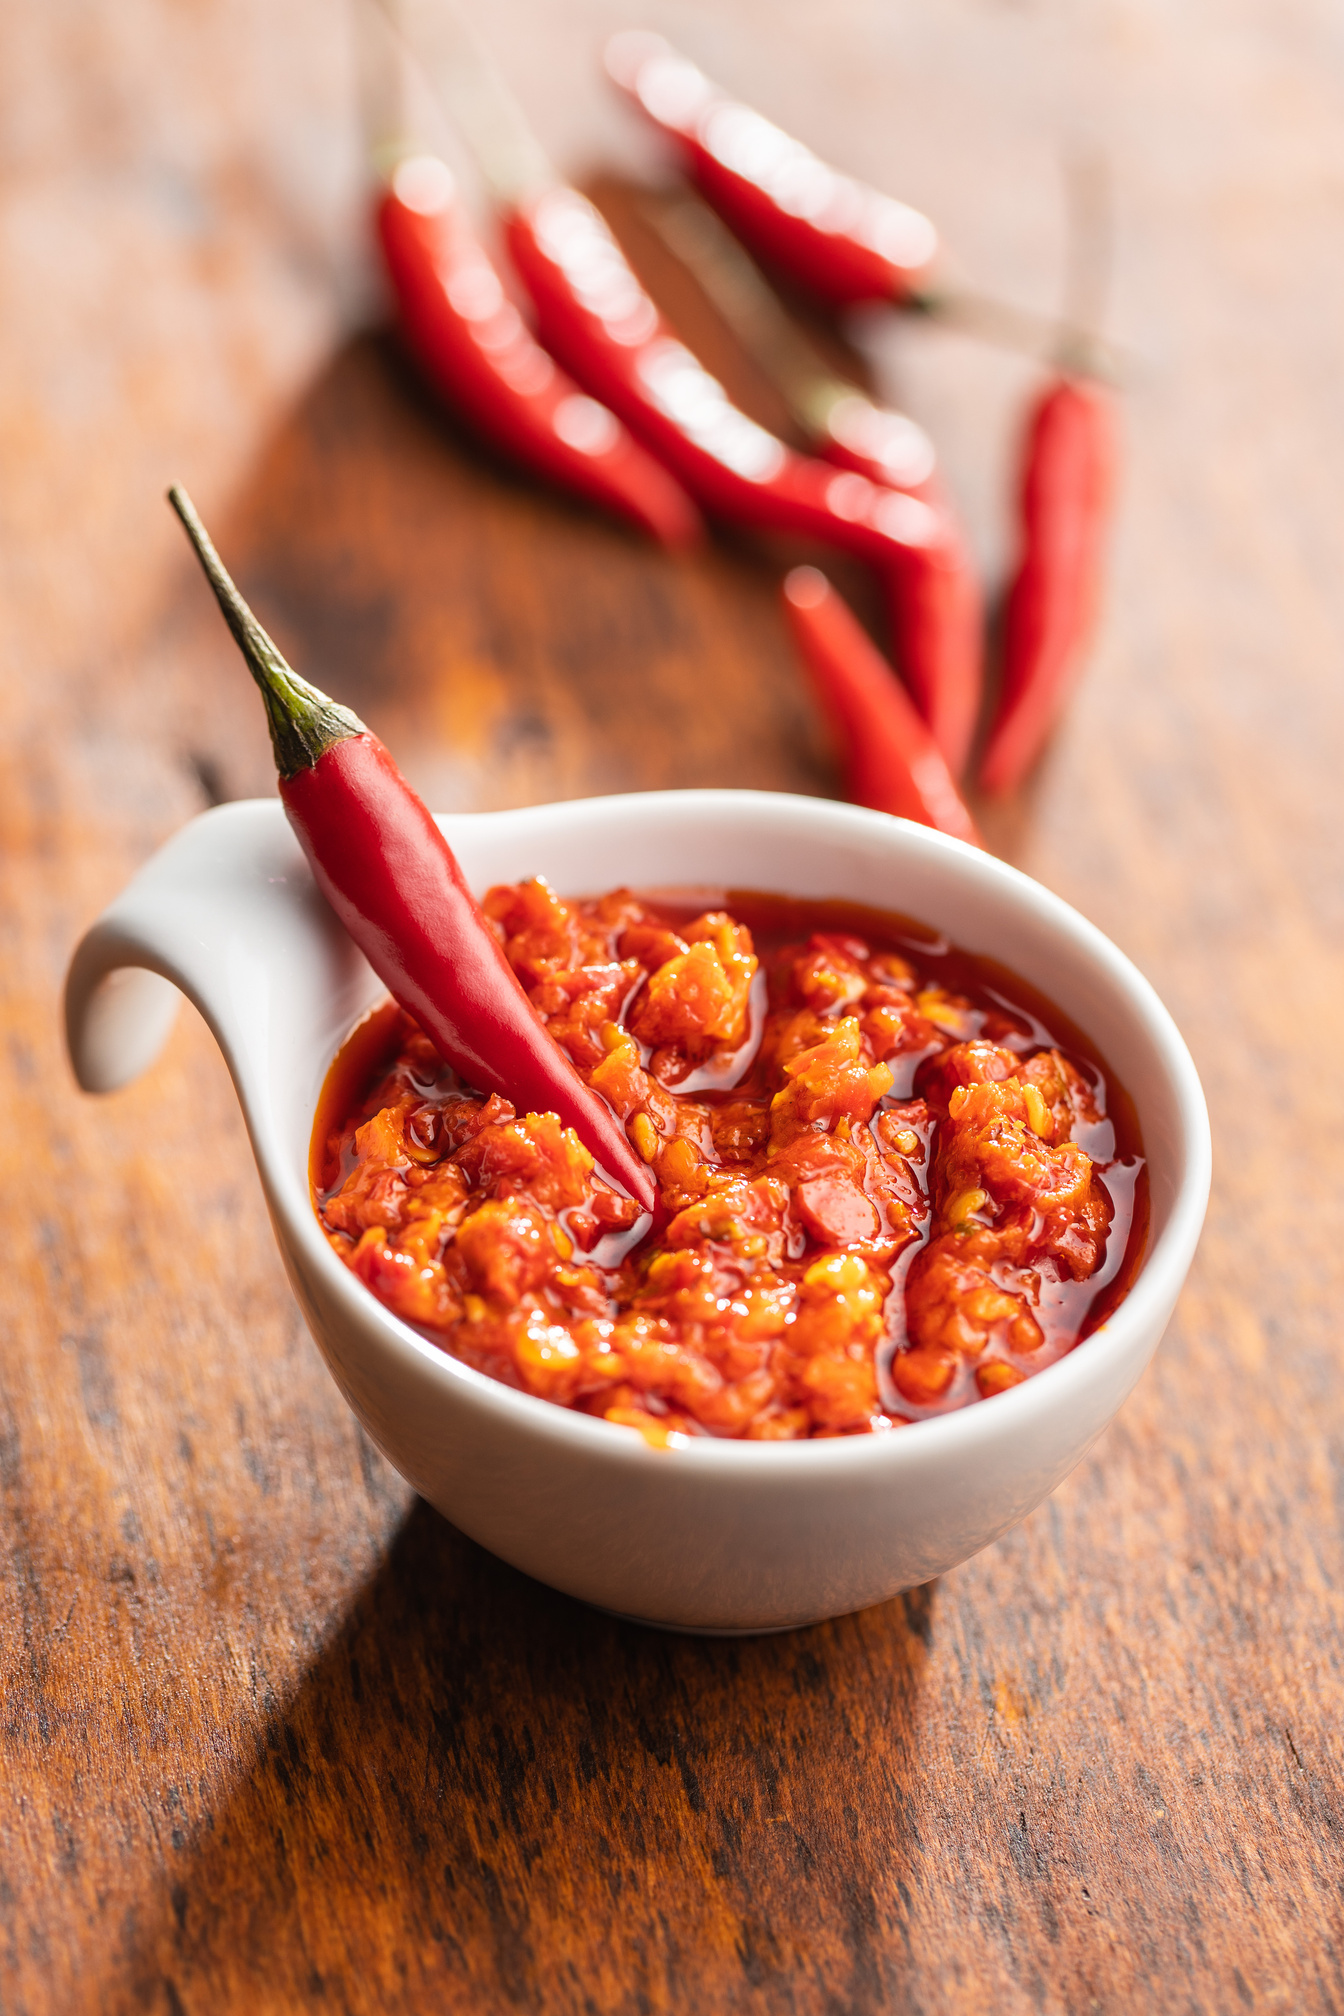 Red hot chili paste and chili pepper